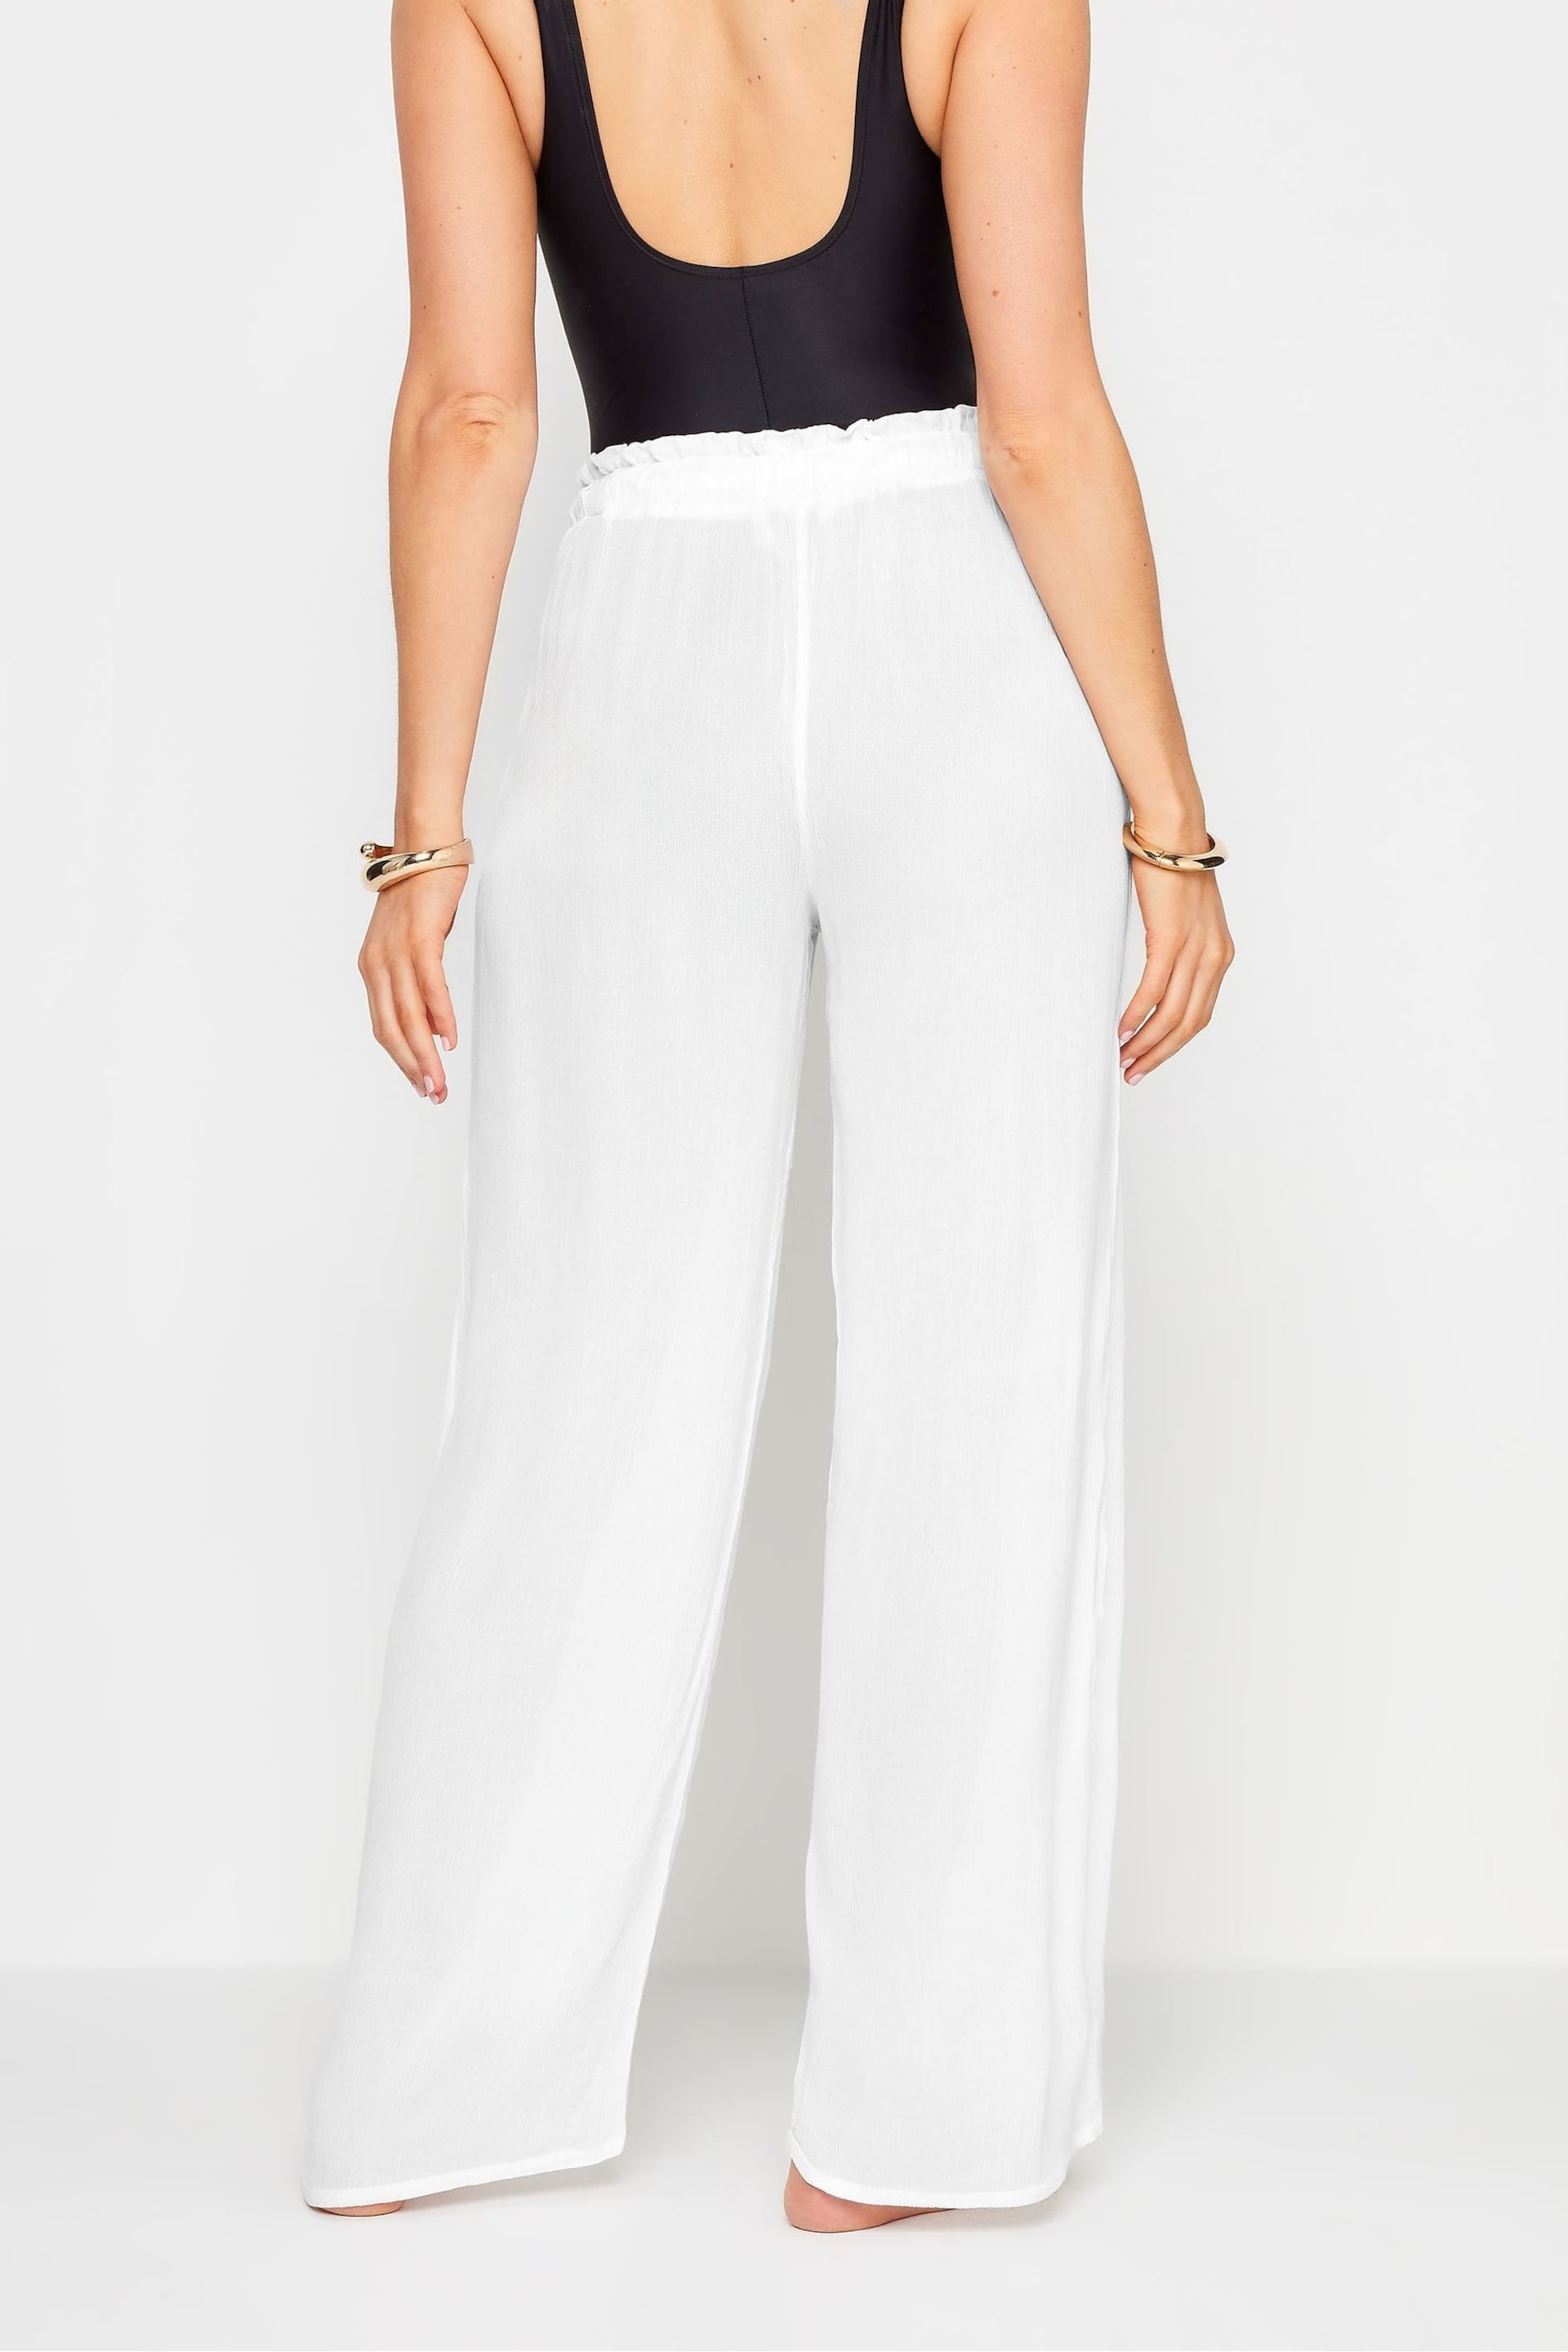 Long Tall Sally White Crinkle Trousers - Image 3 of 5